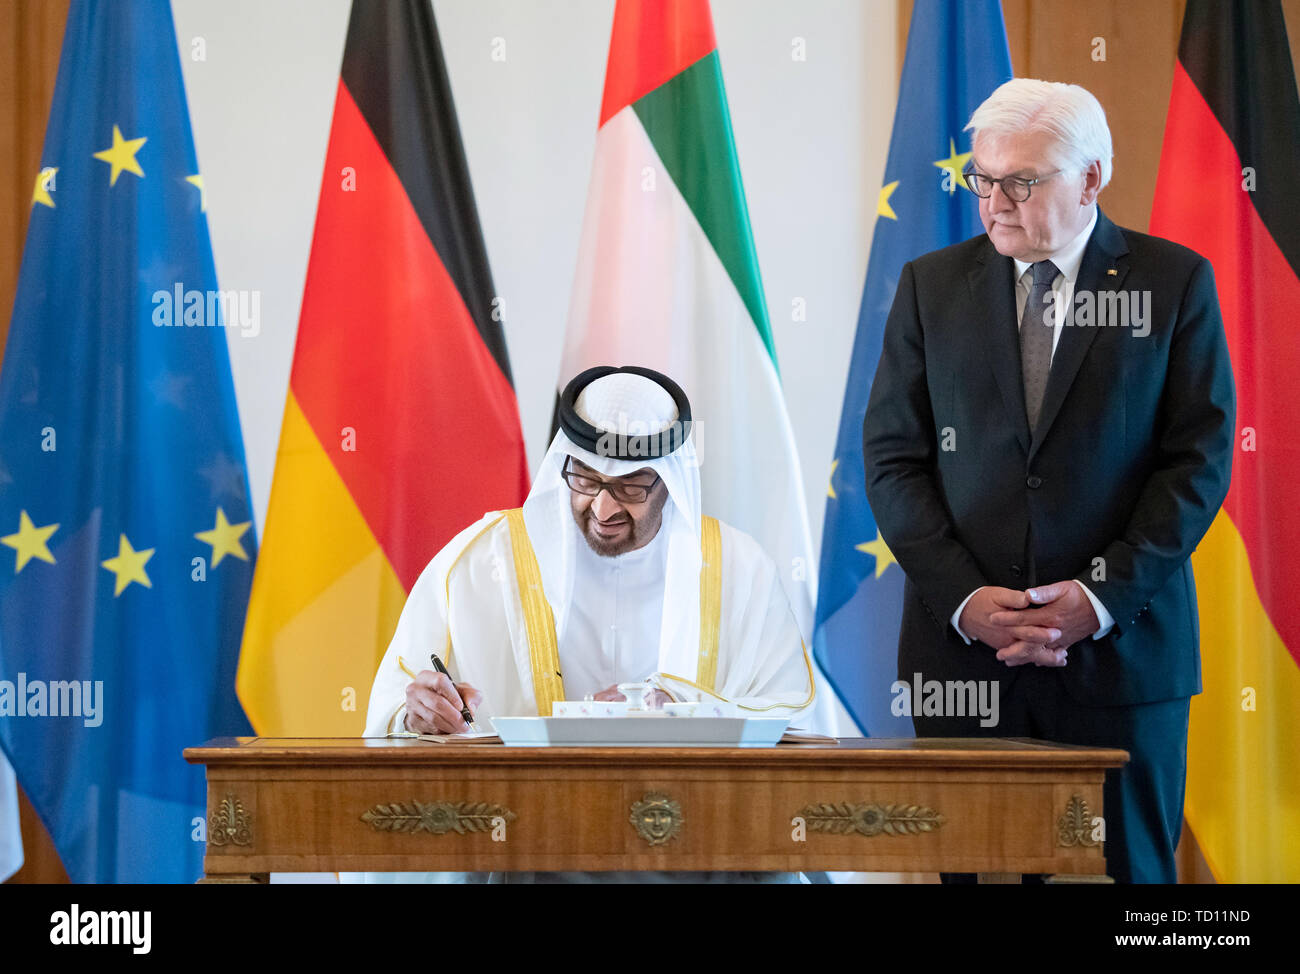 Berlin, Germany. 11th June, 2019. Sheikh Mohammed bin Said Al Nahjan, Crown Prince of Abu Dhabi and Deputy Commander-in-Chief of the Armed Forces of the United Arab Emirates, has signed the guest book in Bellevue Castle in the presence of Federal President Frank-Walter Steinmeier. Credit: Bernd von Jutrczenka/dpa/Alamy Live News Stock Photo